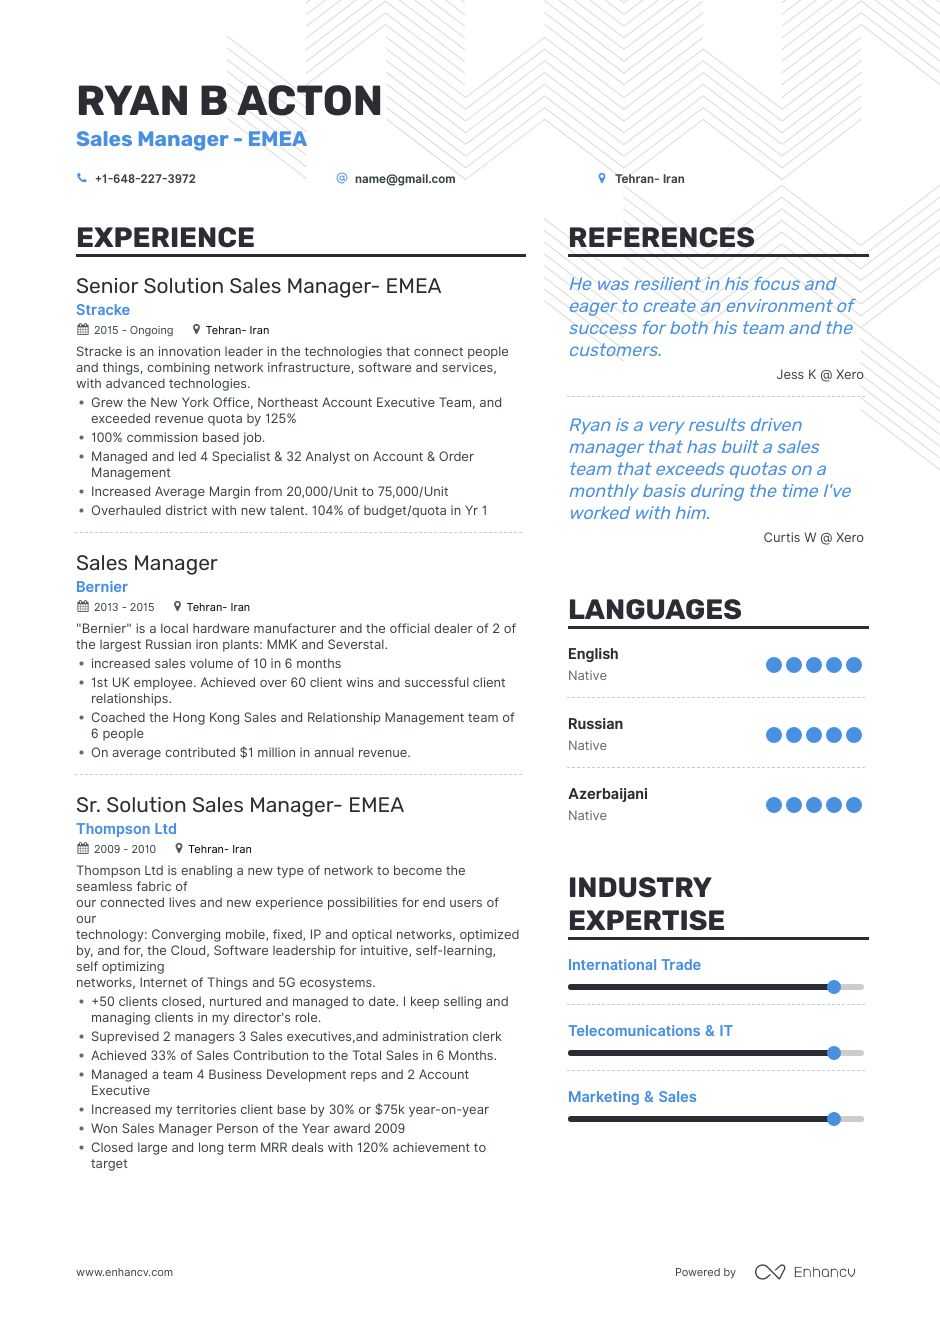 Best Sales Manager Resume Examples with Objectives, Skills ...